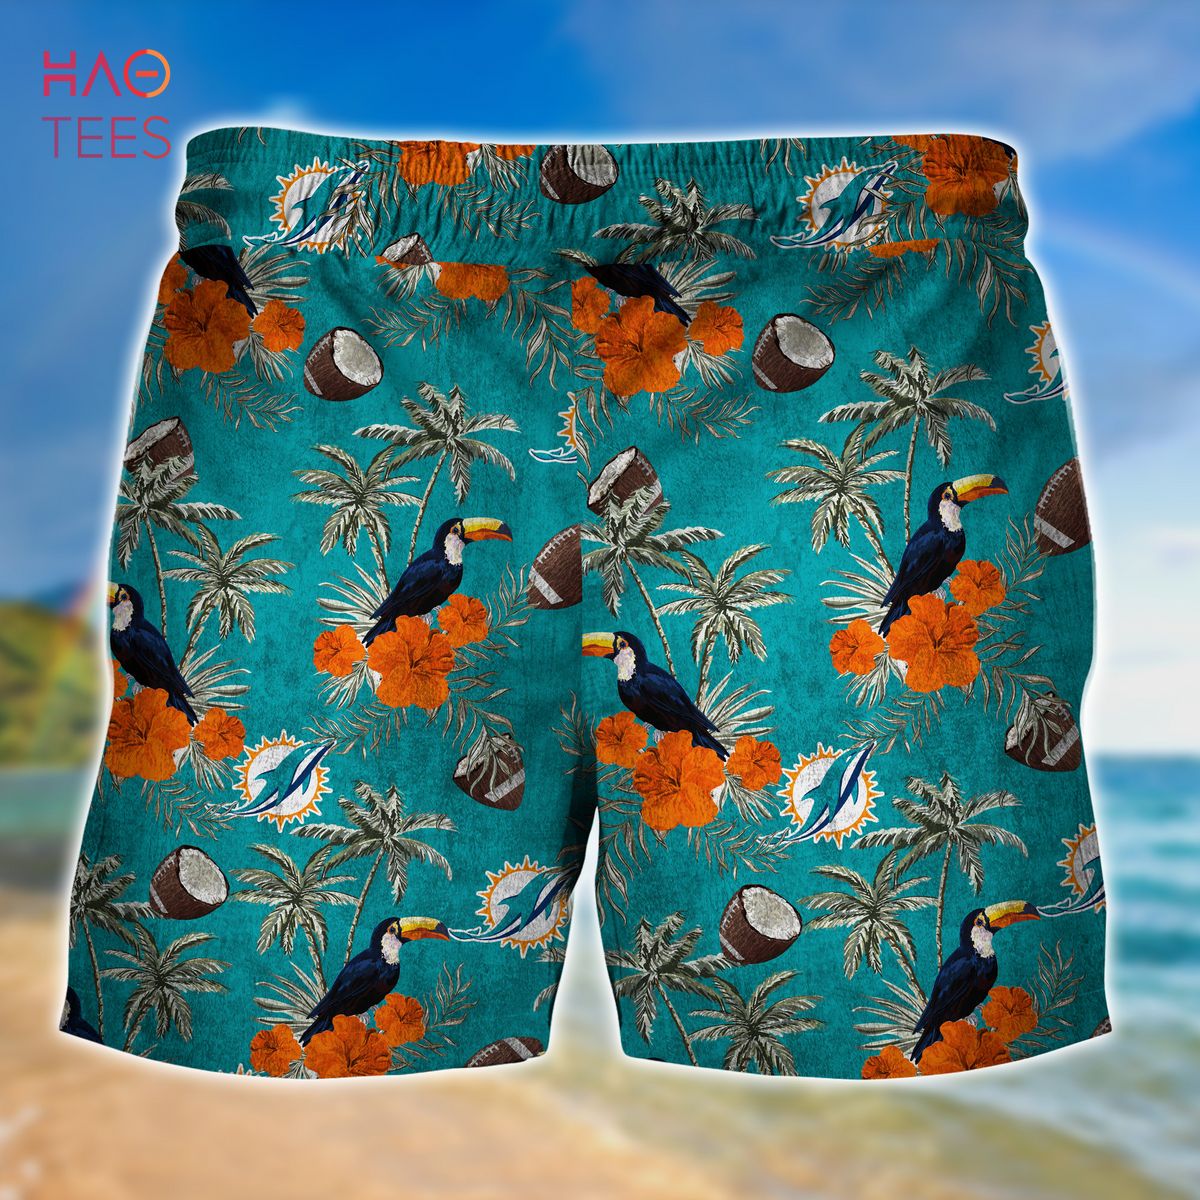 NFL Miami Dolphins Hawaii Shirt Unique Gift Summer - Limotees